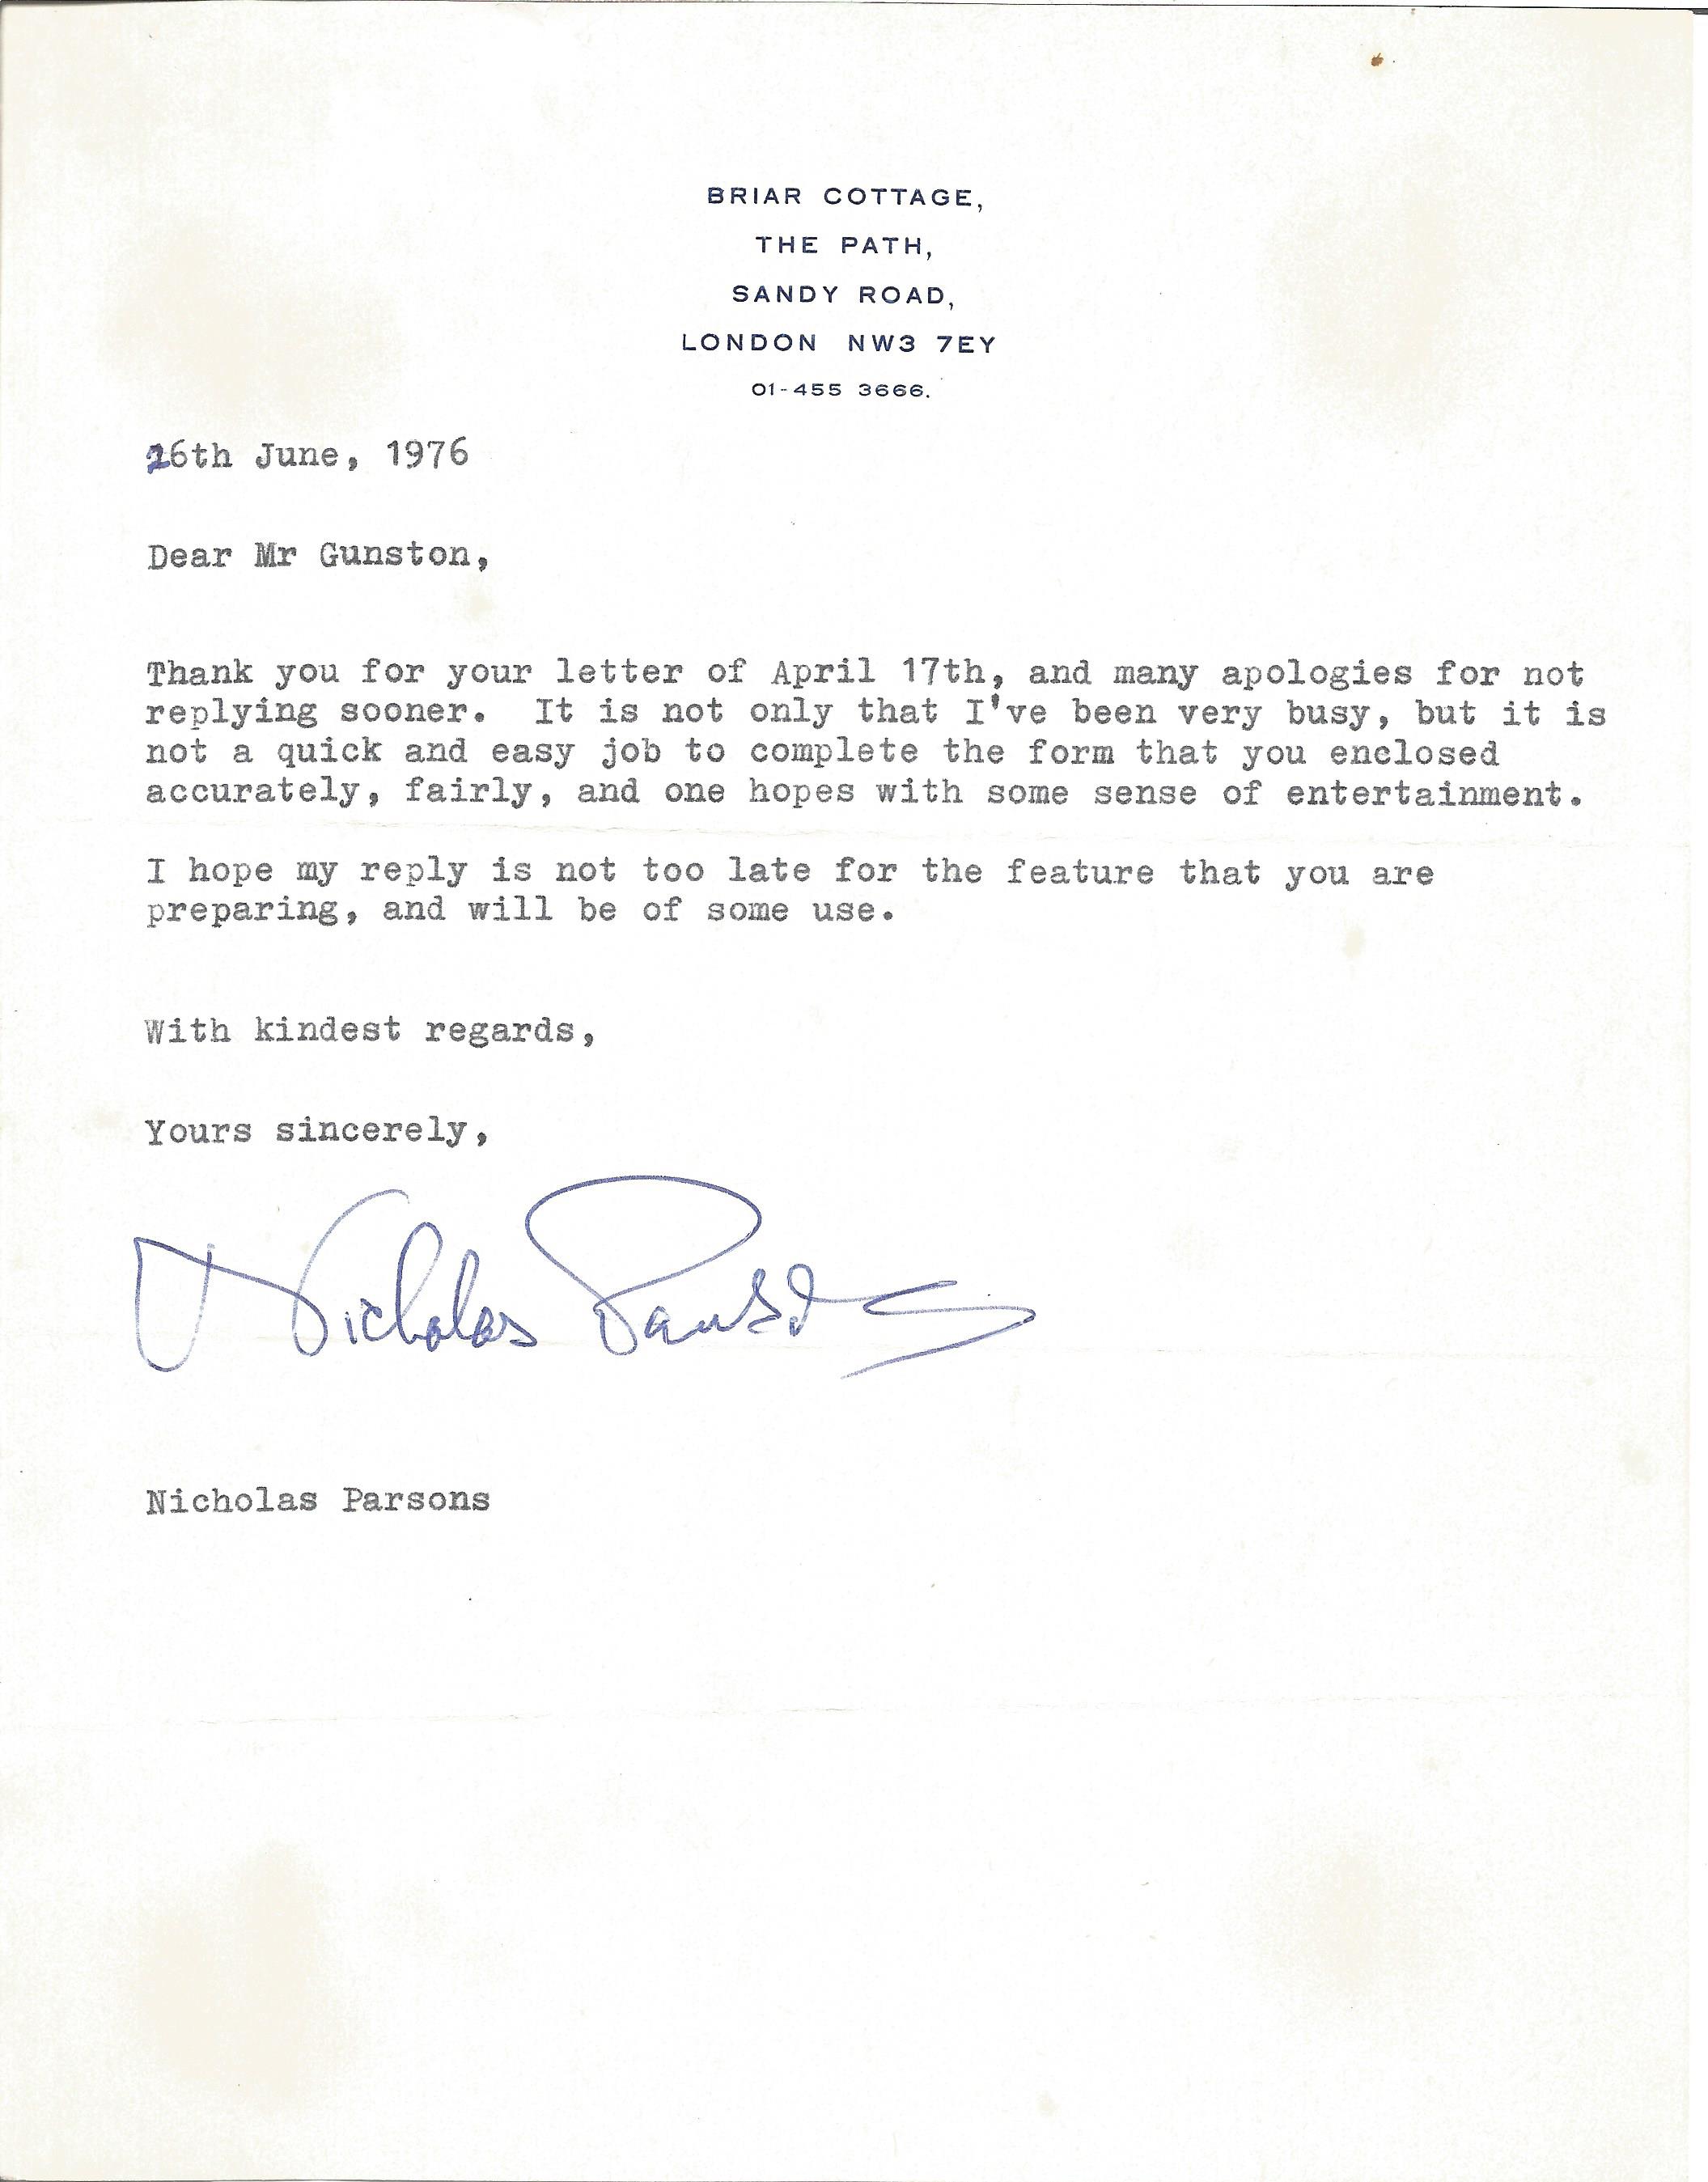 Nicholas Parsons signed letter enclosing the answers to a questionnaire he was sent not present.